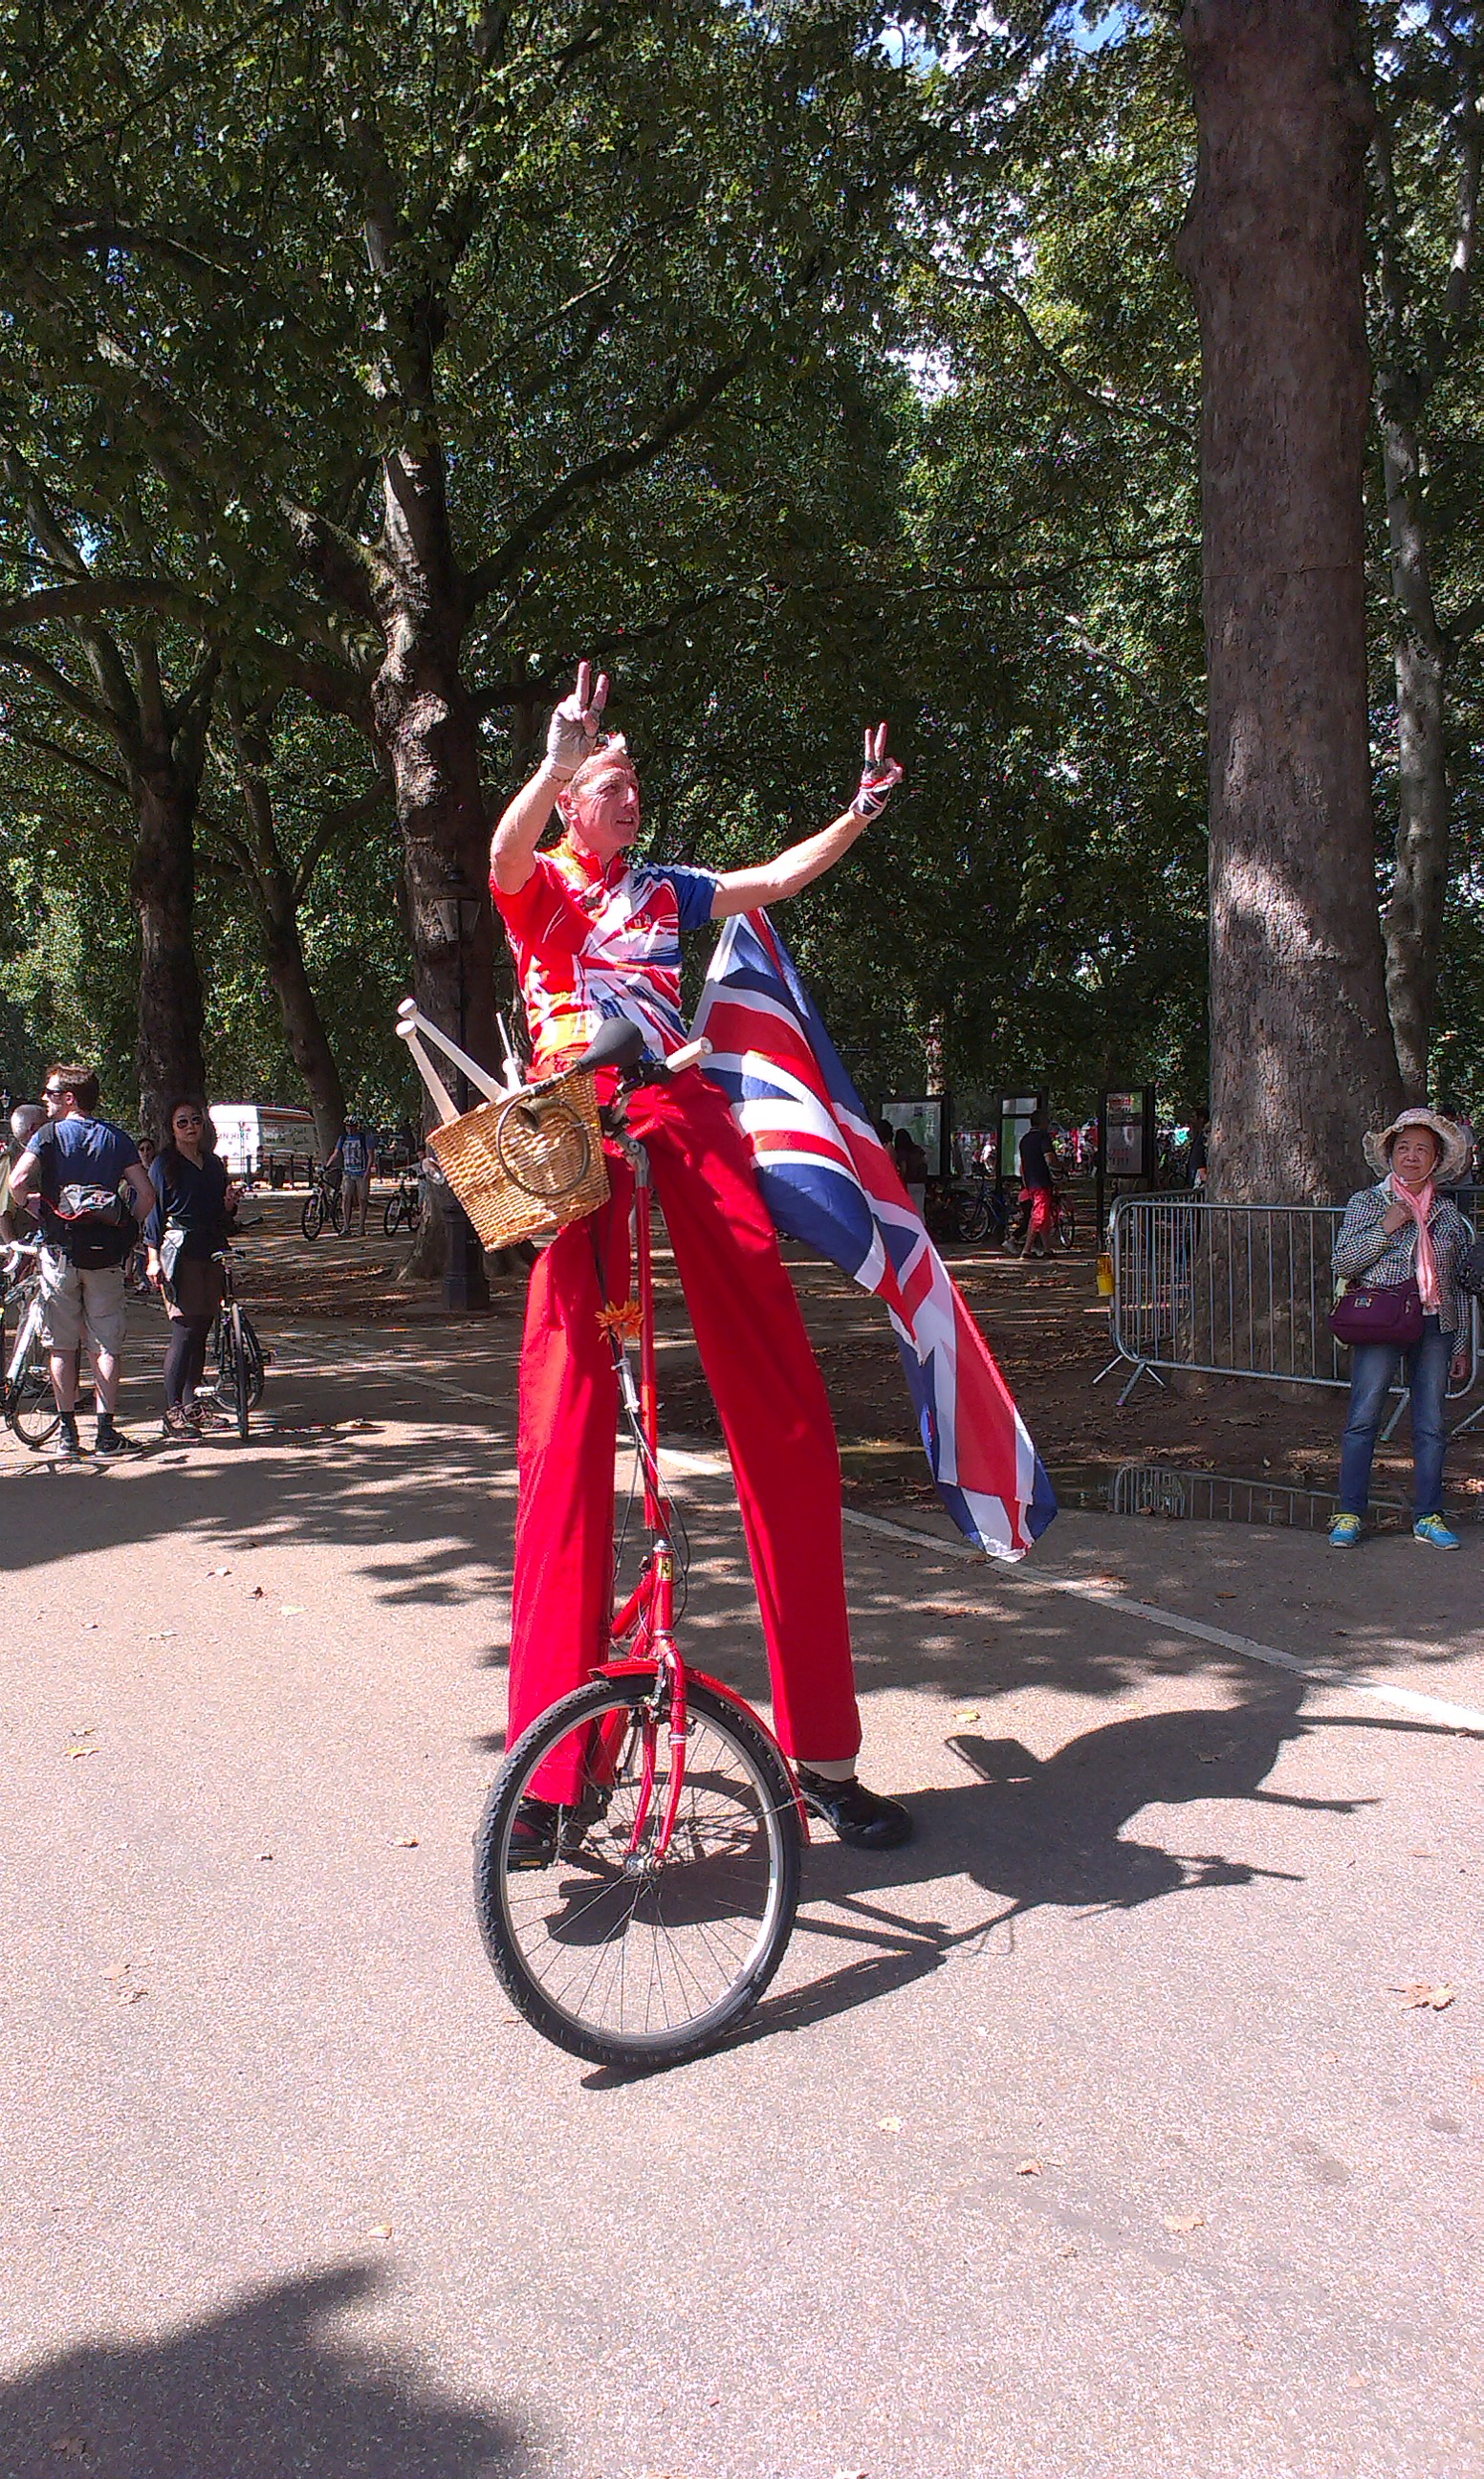 On a bike AND stilts in Green Park